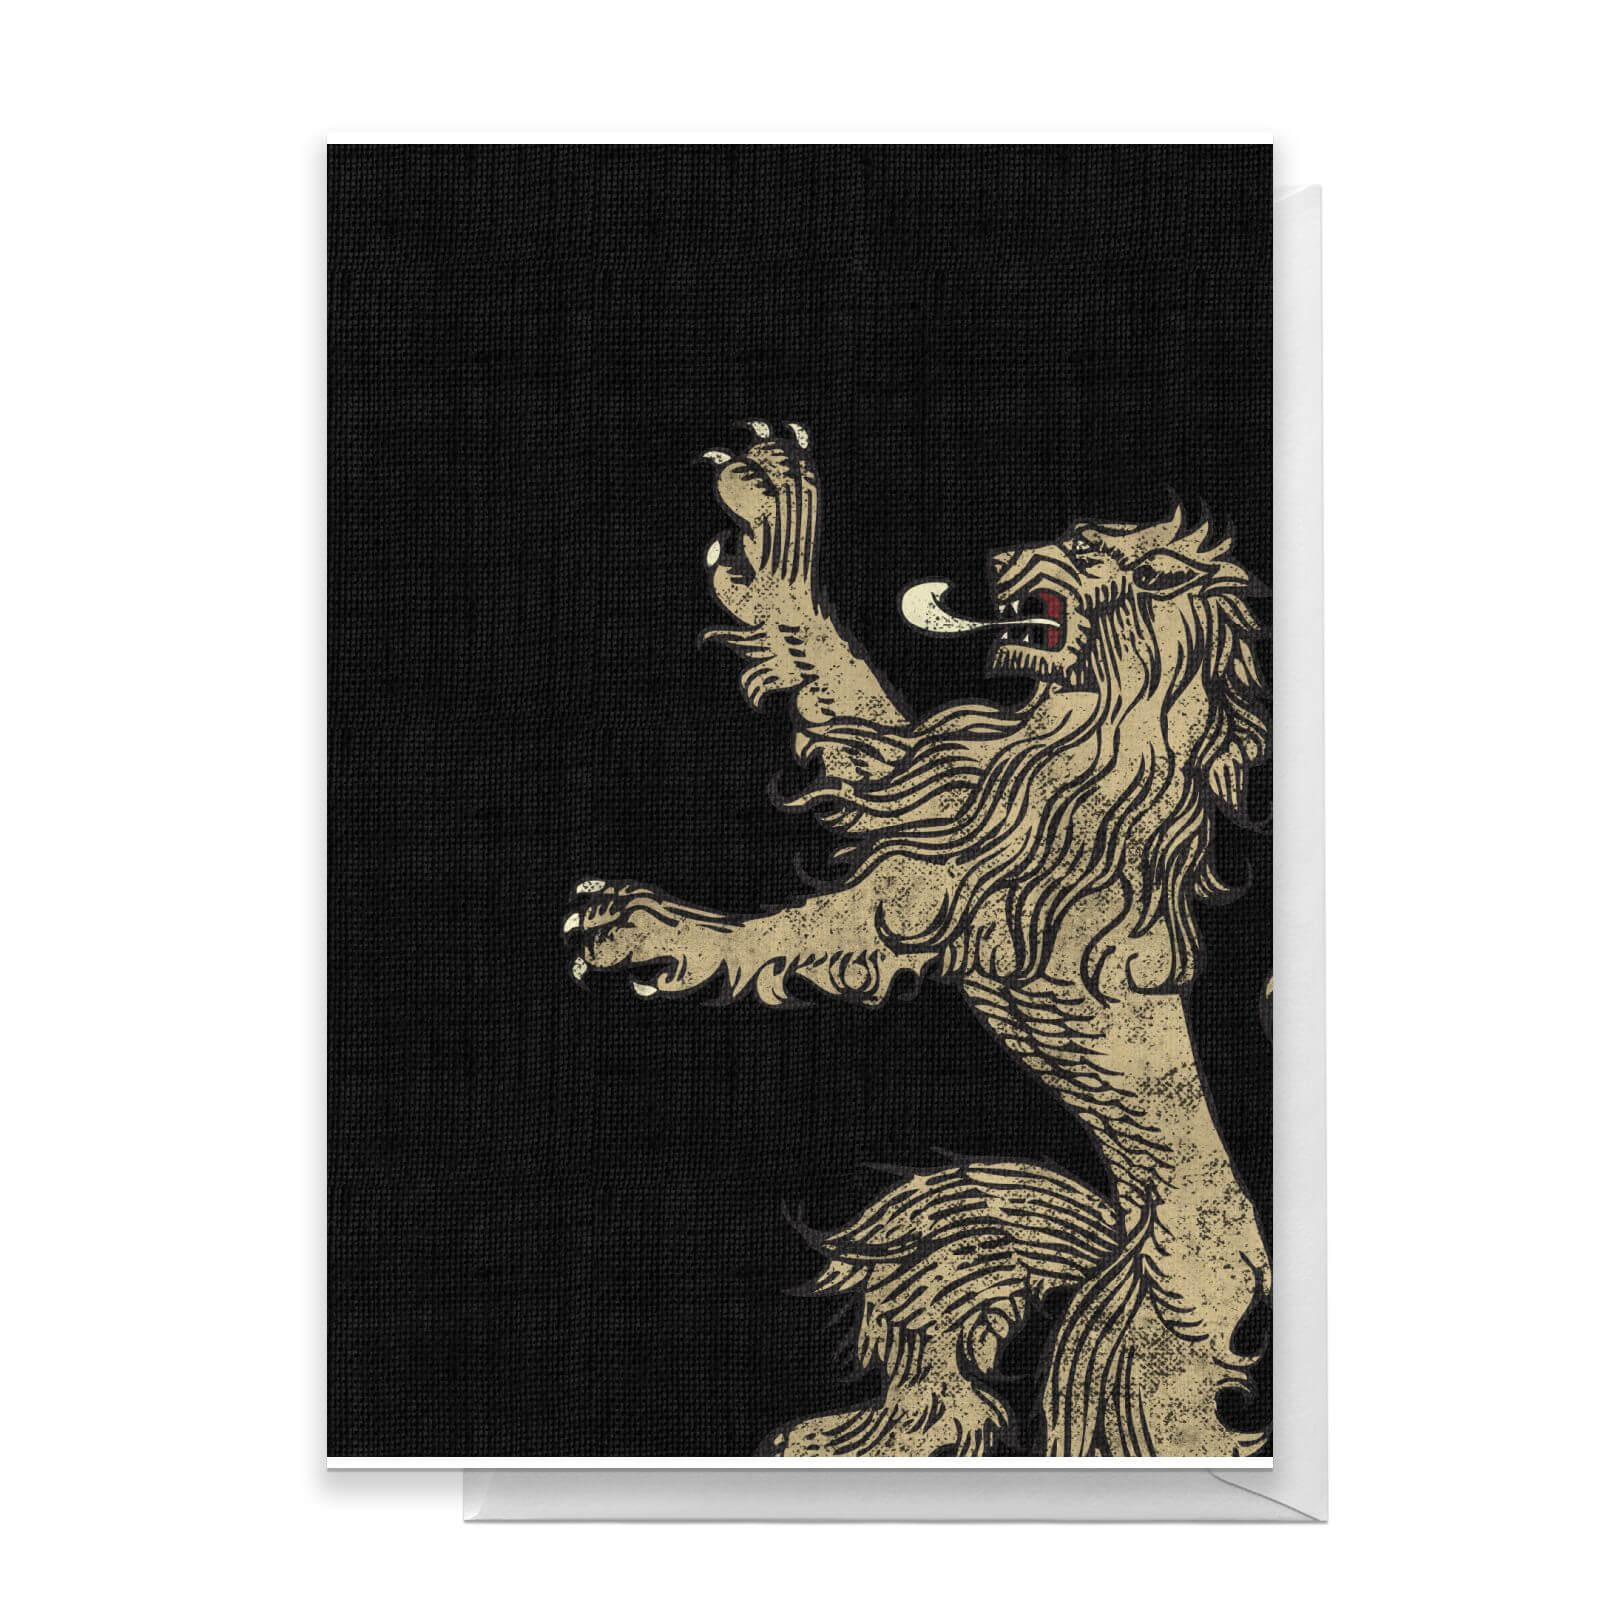 Bild von Game of Thrones House Lannister Greetings Card - Large Card